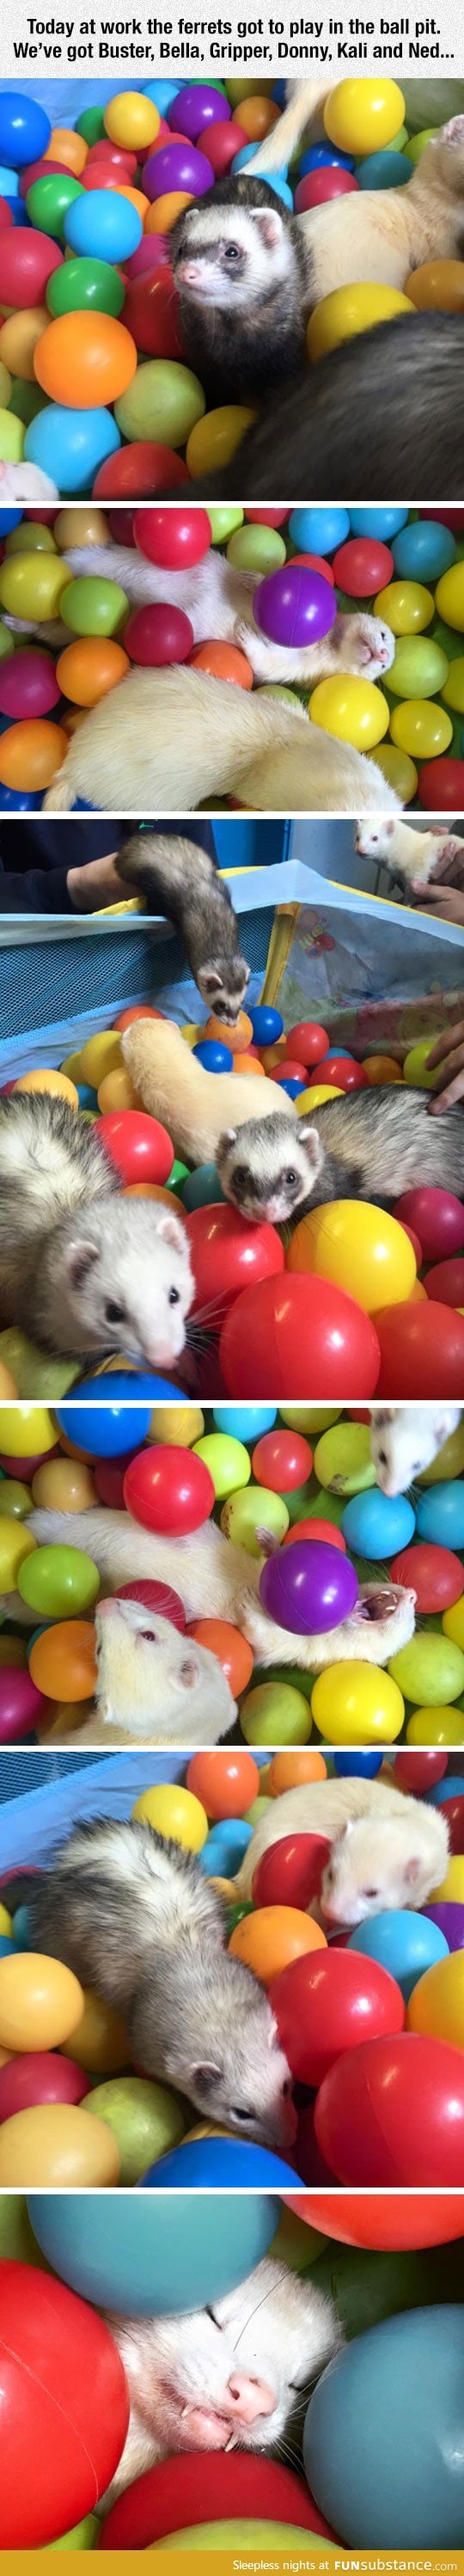 Ferrets playing in the ball pit